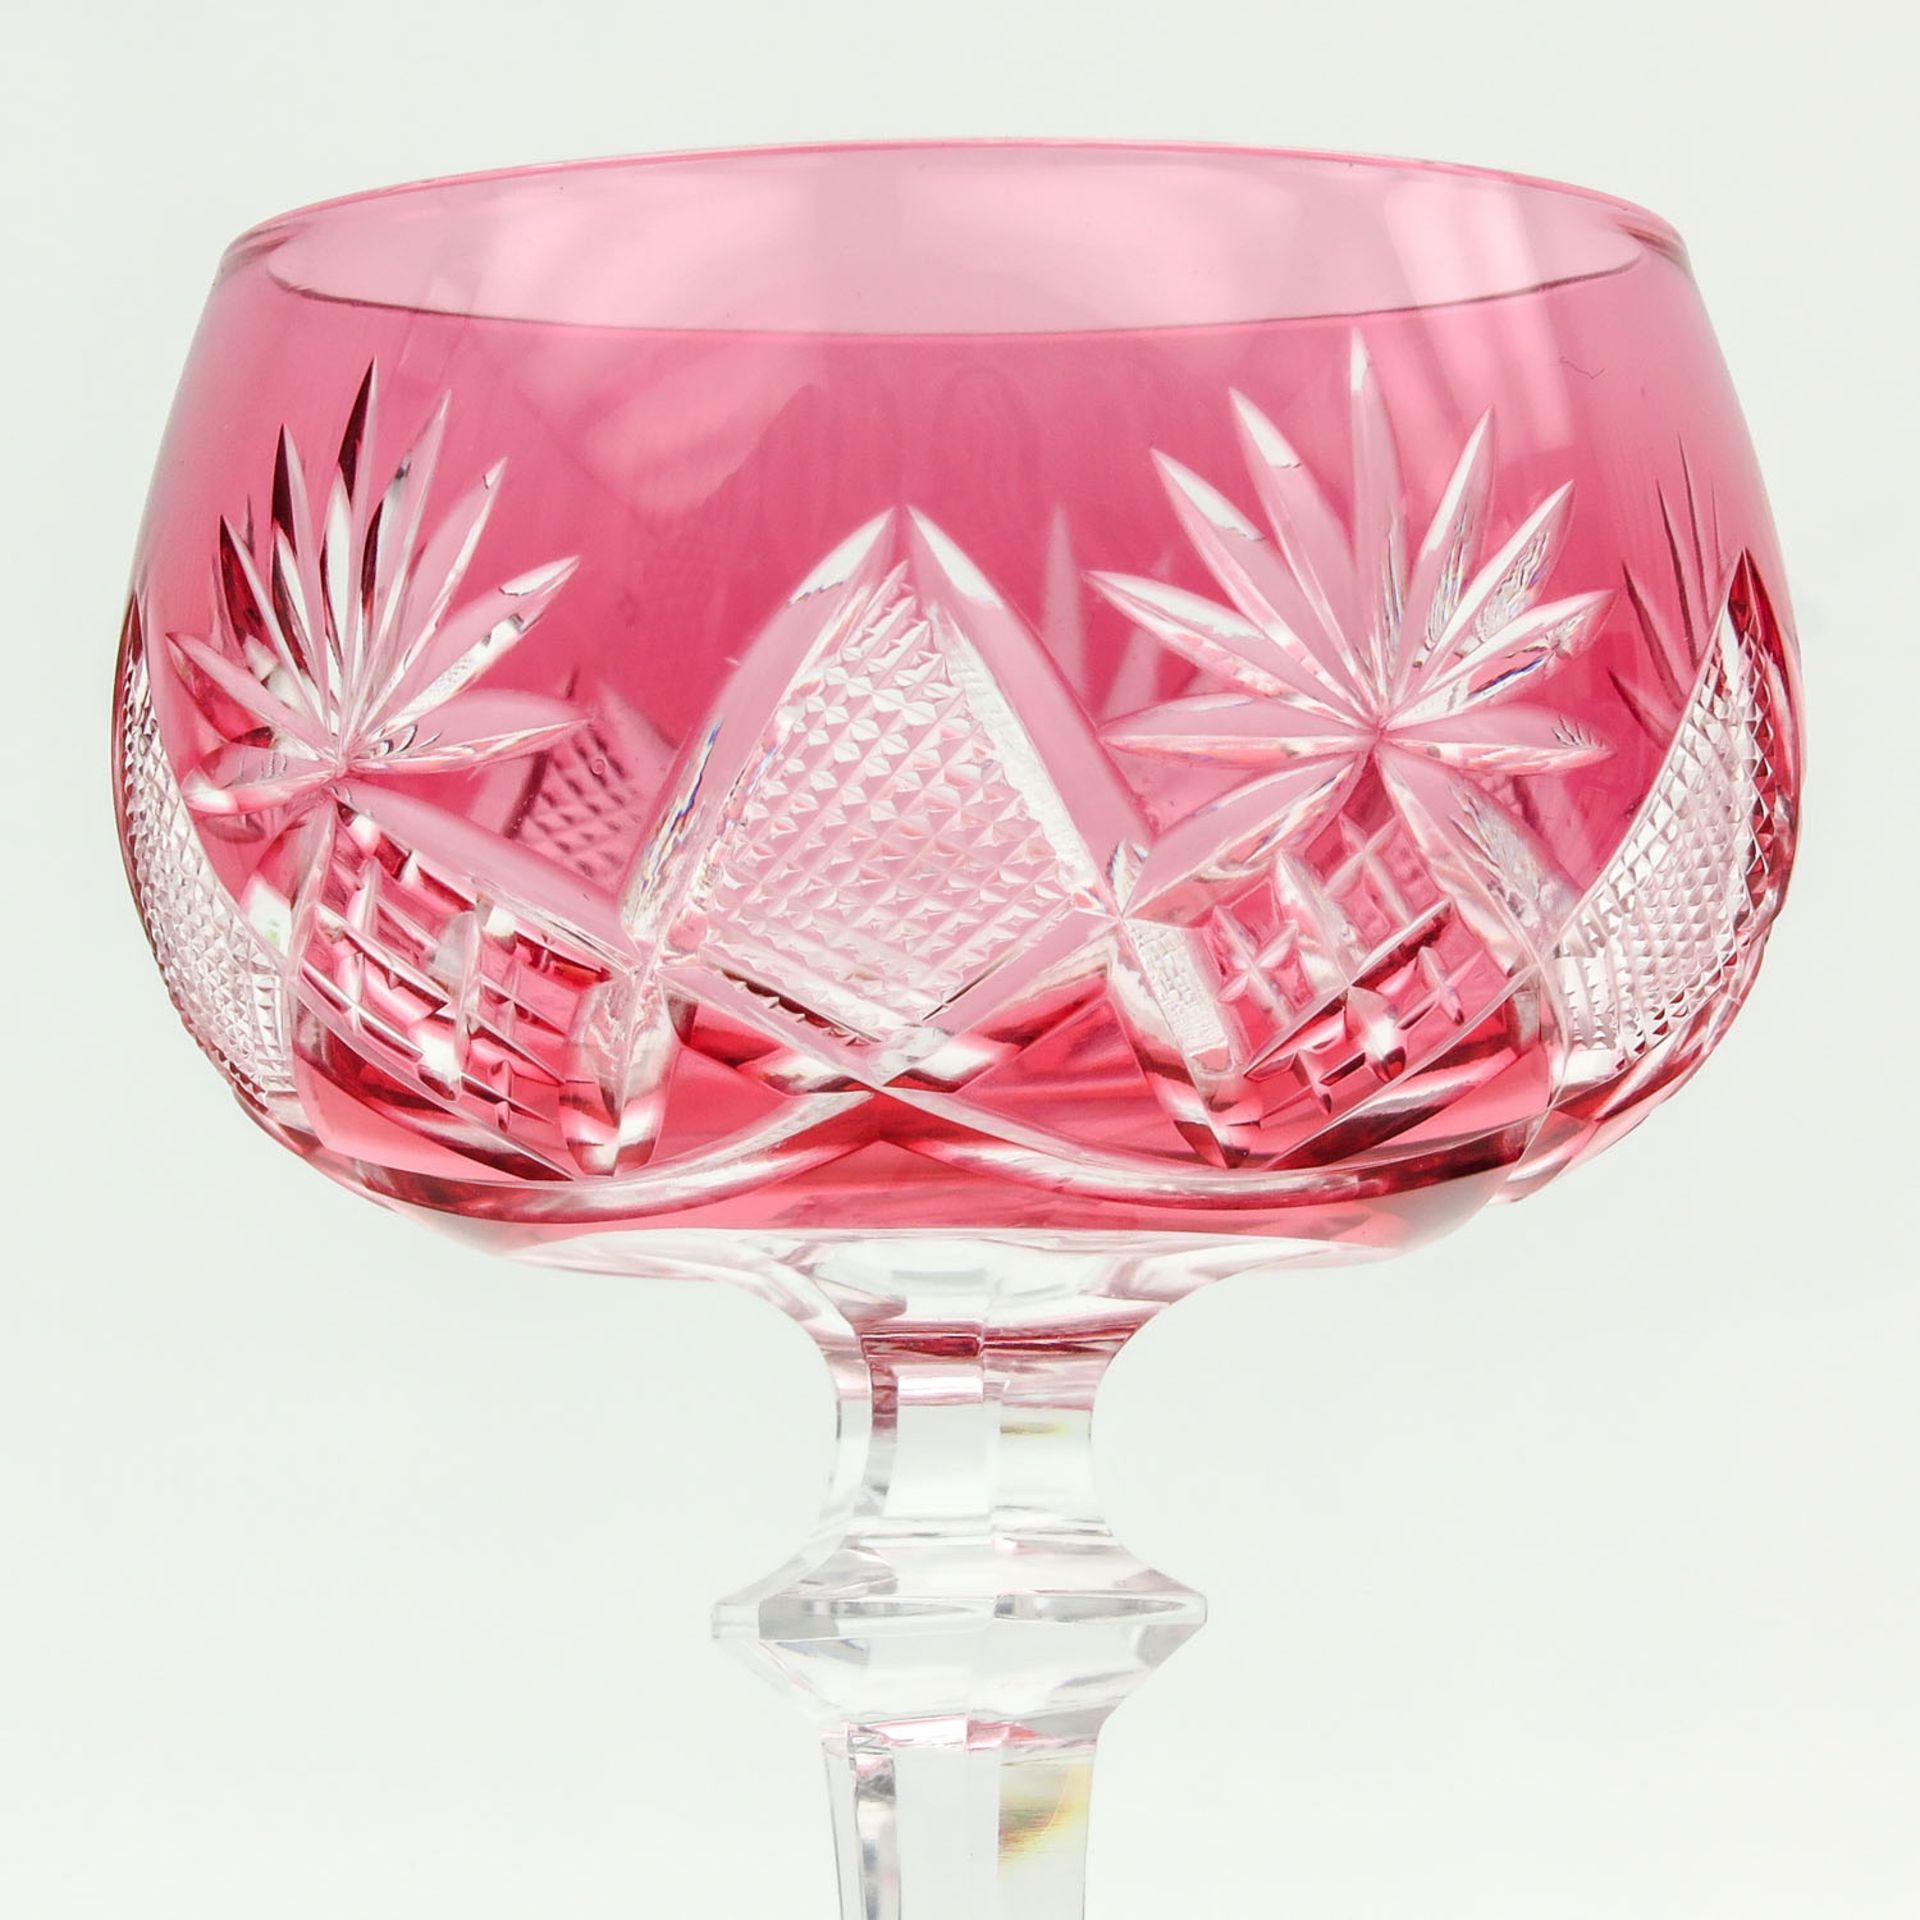 A Collection of Colored Crystal Stemware - Image 9 of 10